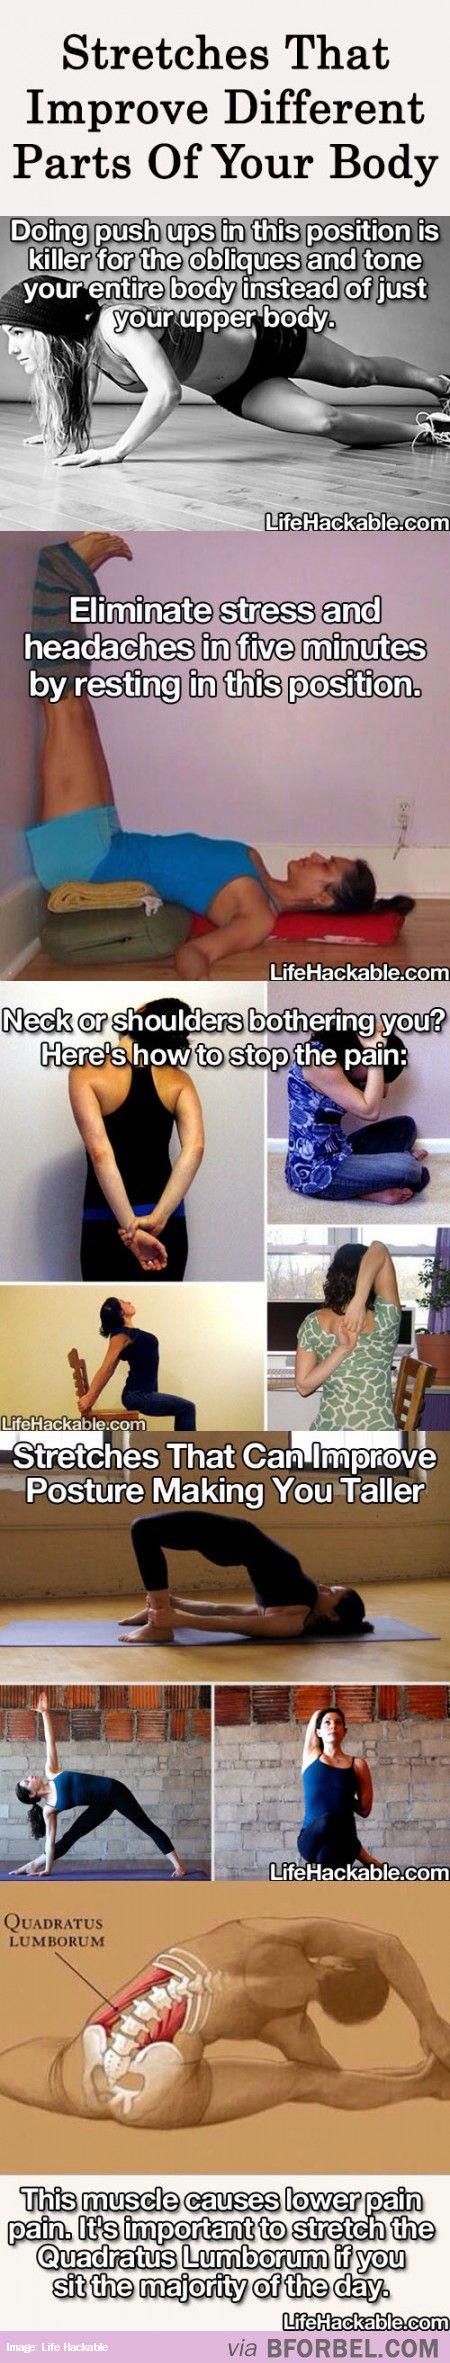 Stretches for Your Body